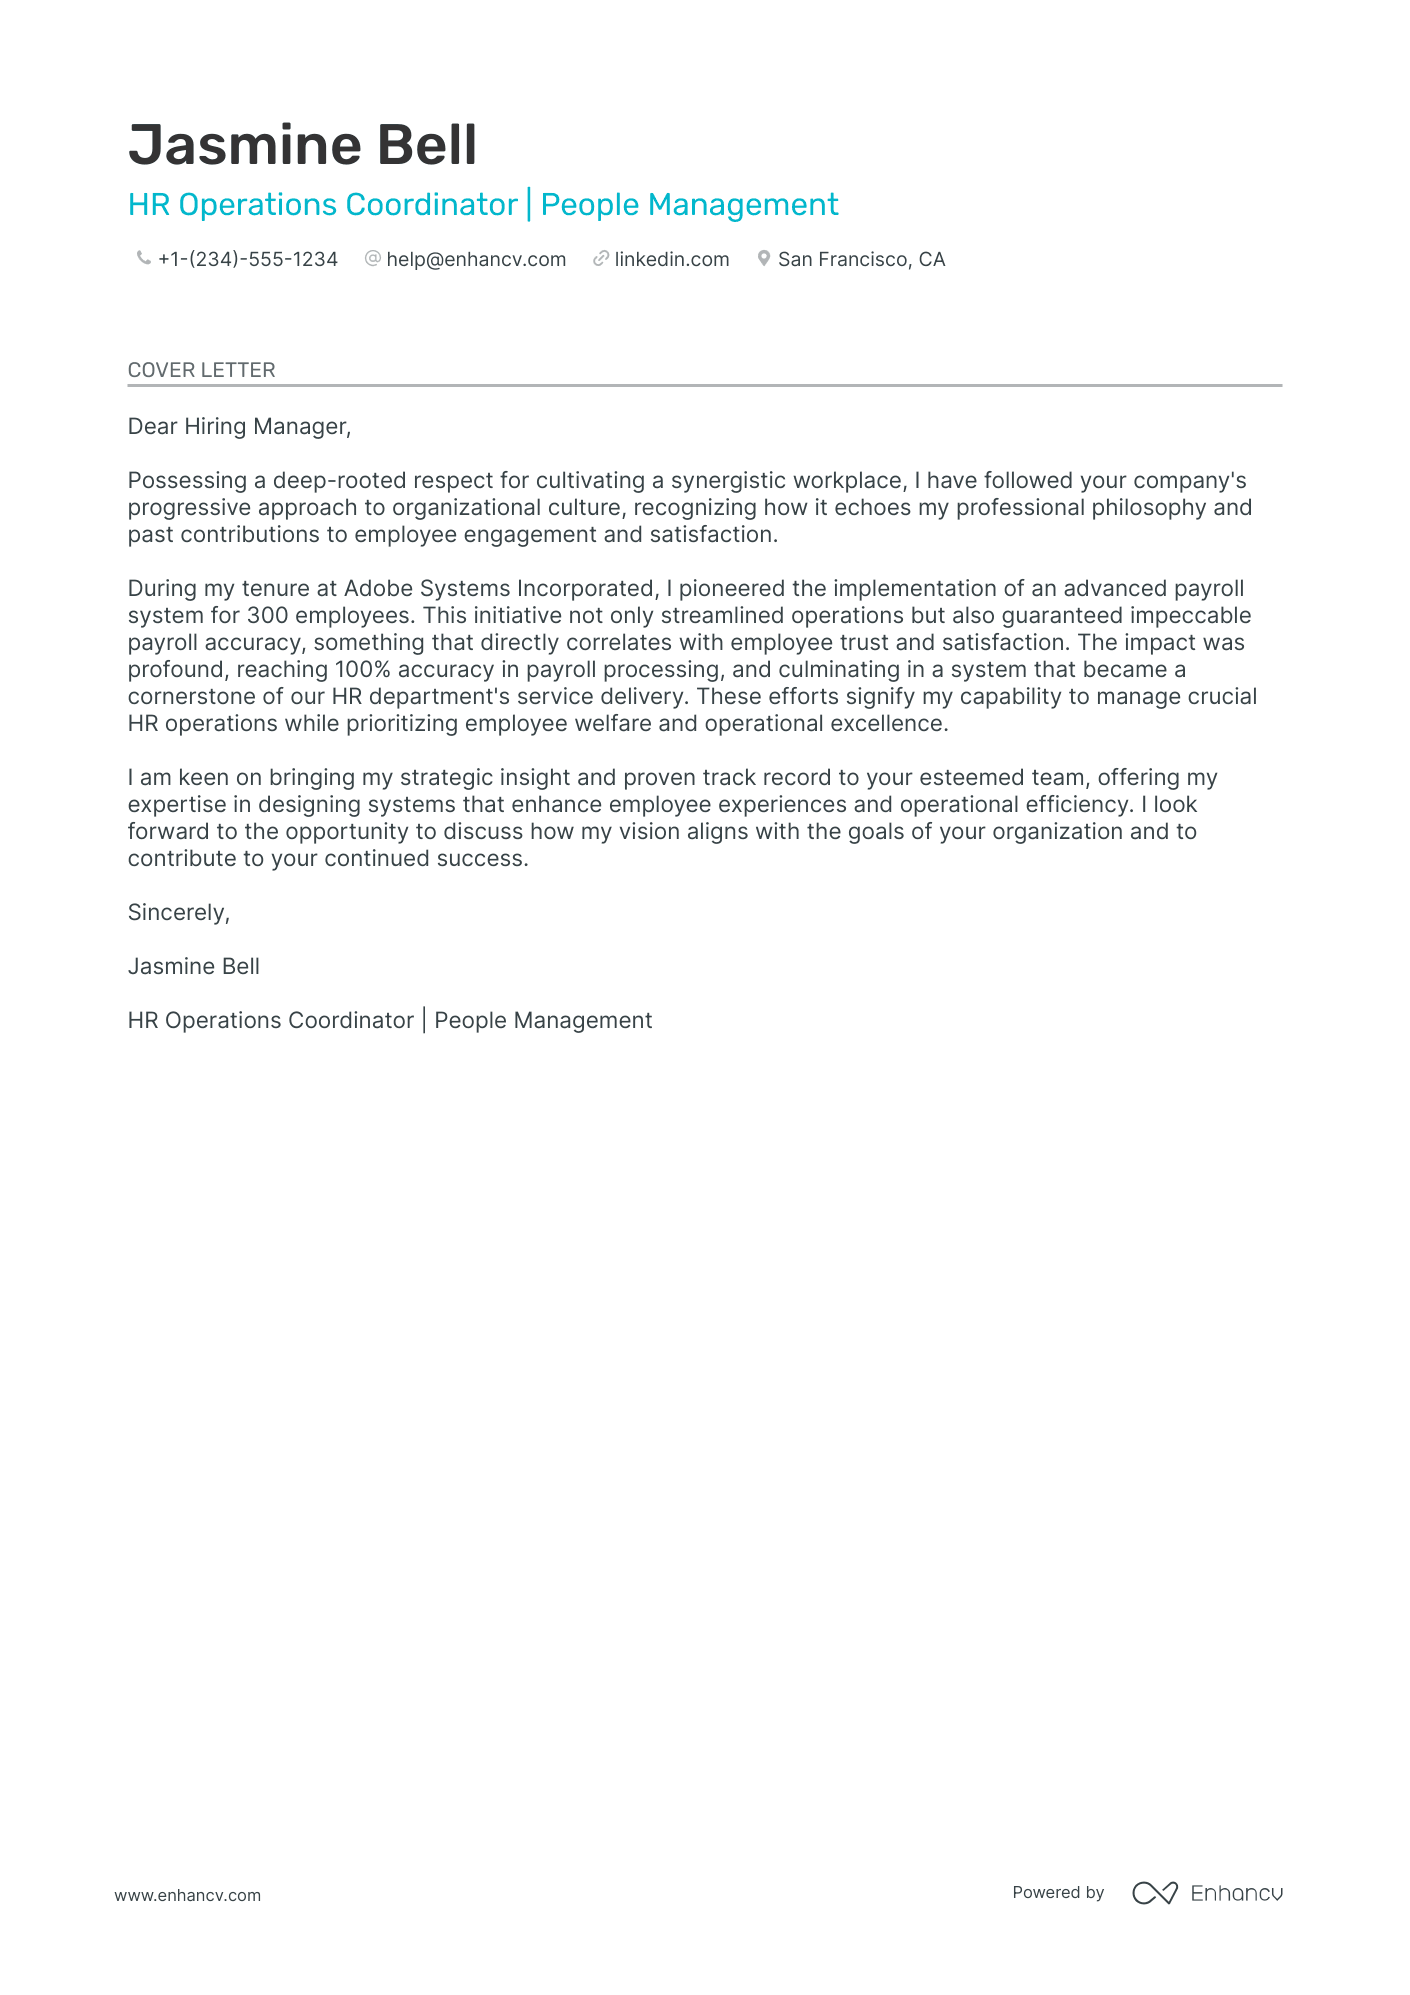 Human Resources Coordinator cover letter